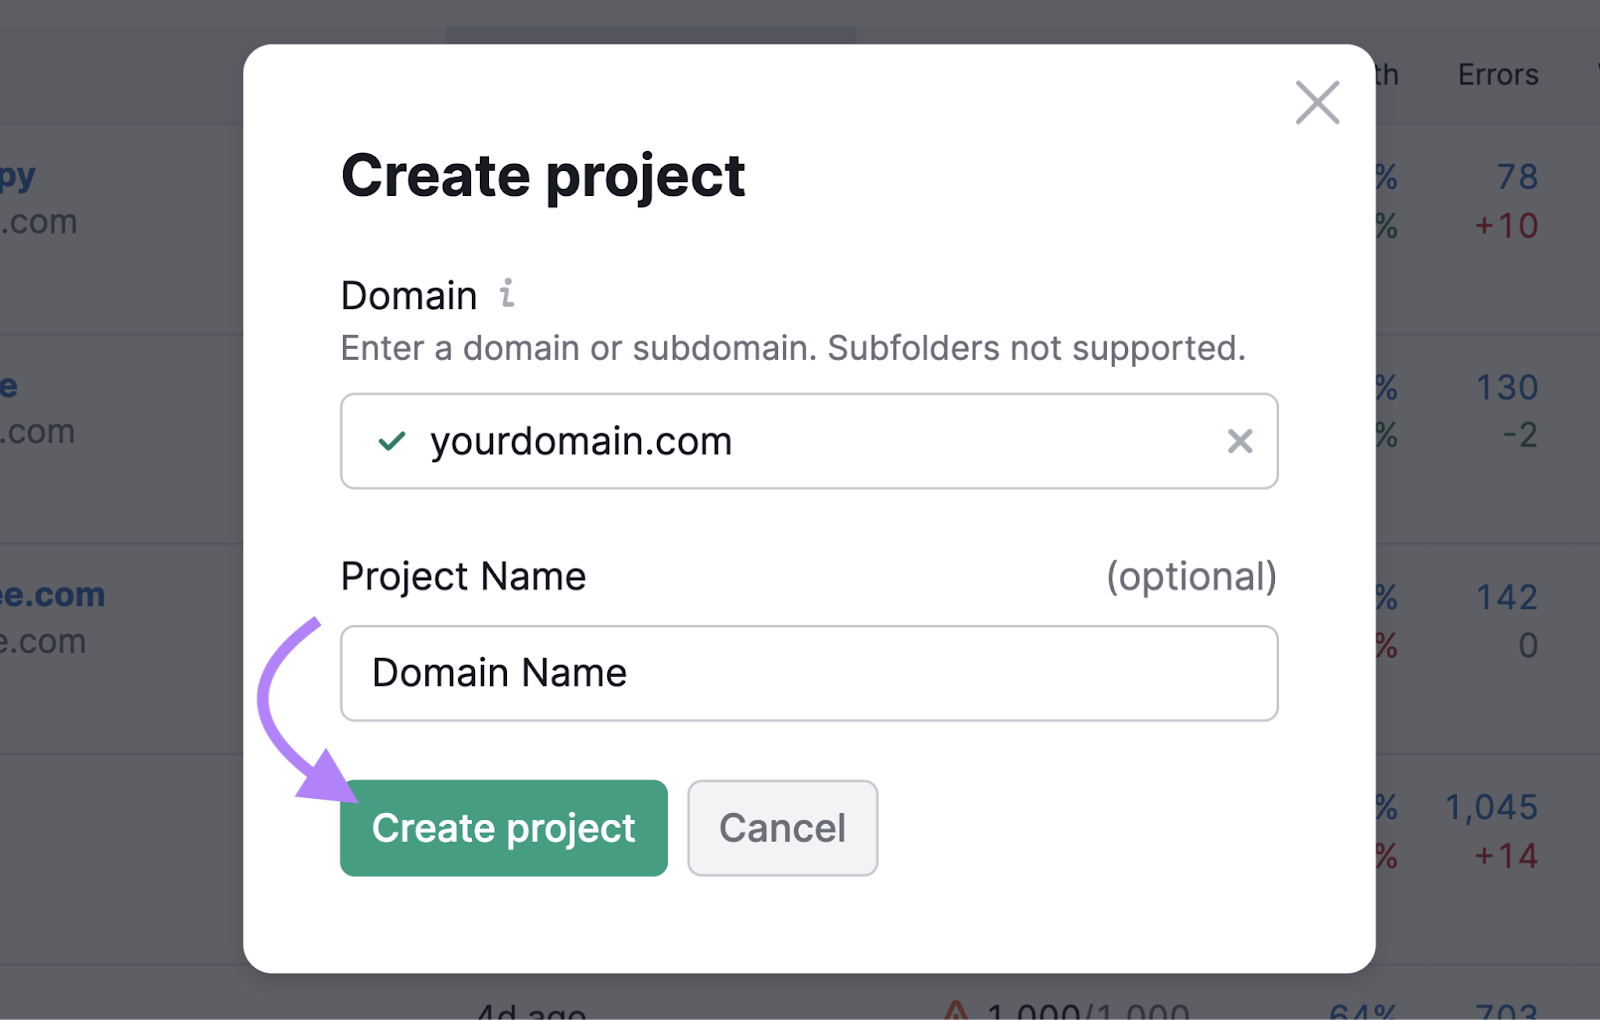 "Create project" on Semrush with input boxes to enter a domain and a name for the project.